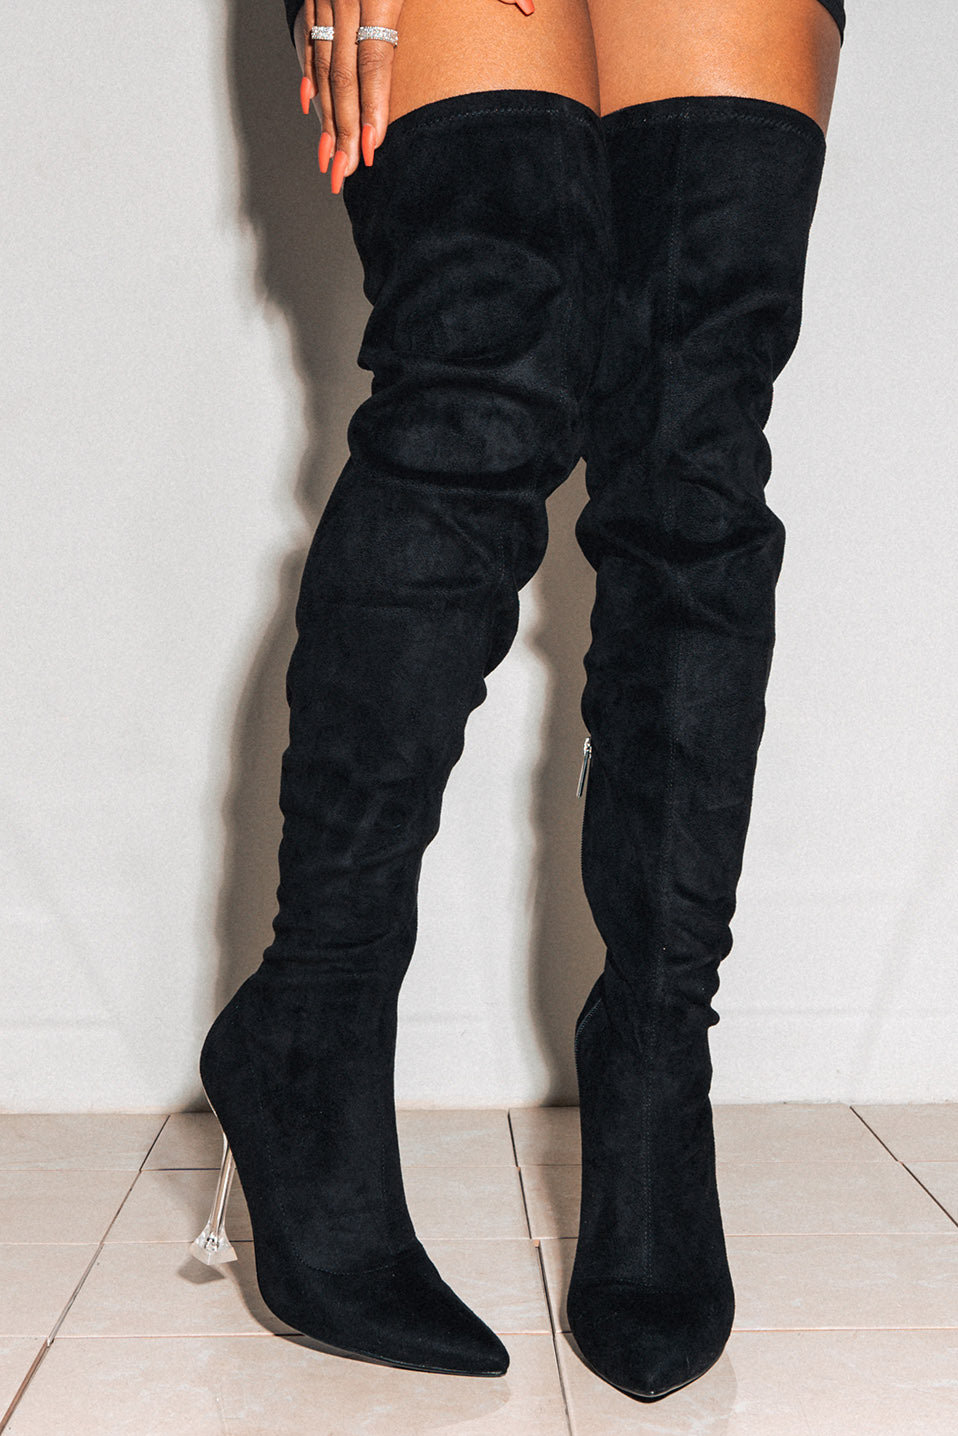 UrbanOG - Estele Clear Pointy Toe Thigh High Boots - BOOTS